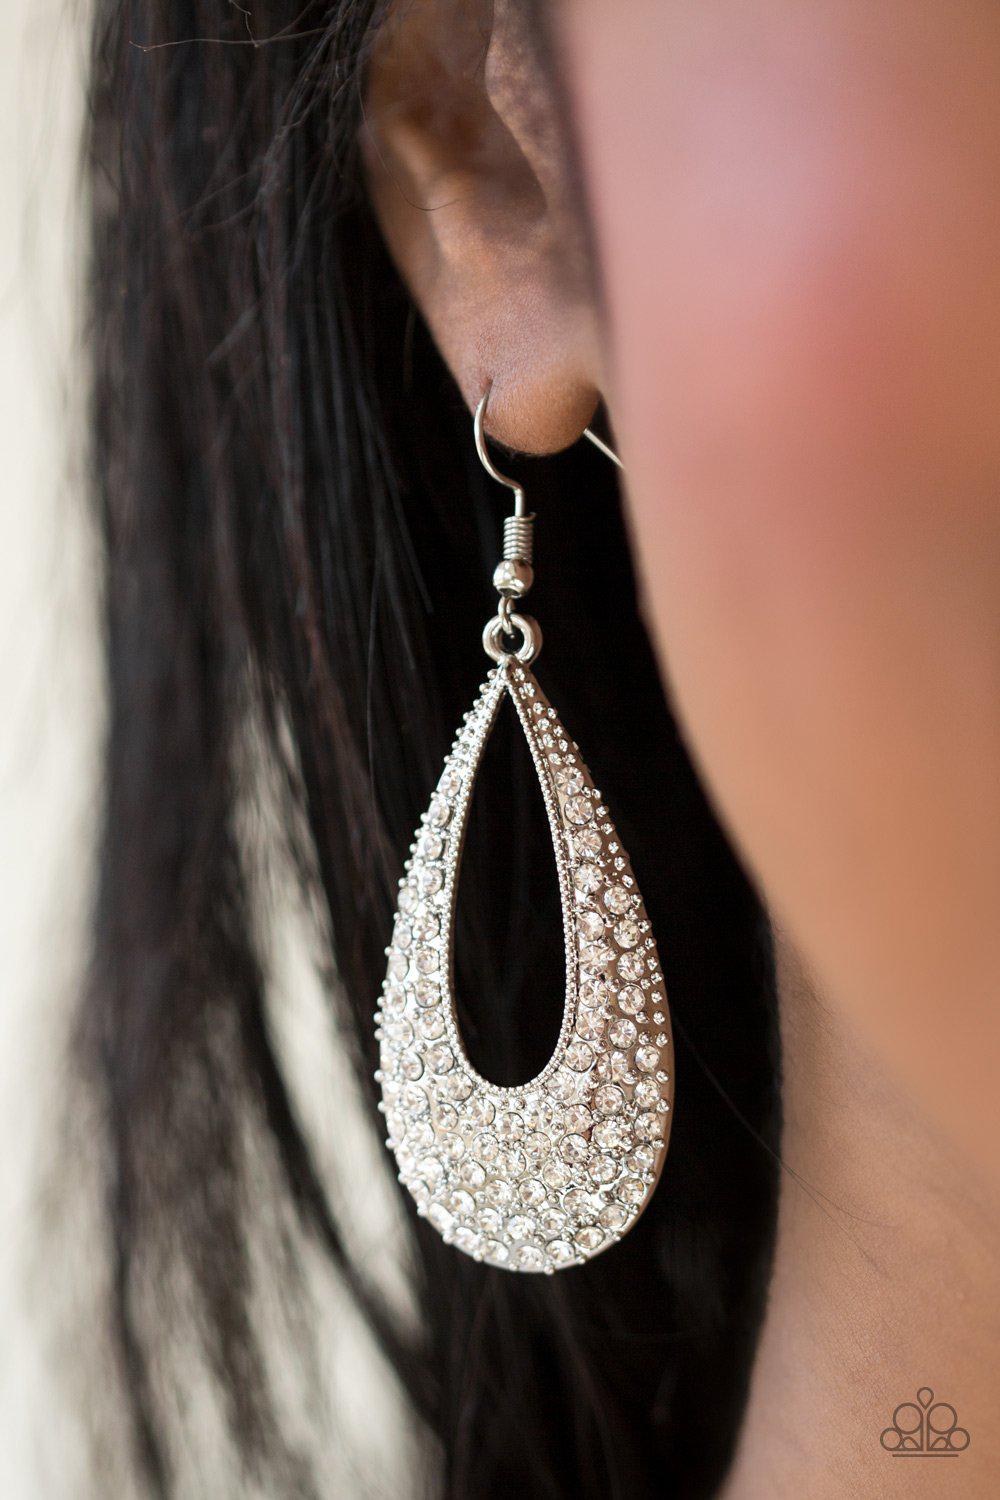 Big-Time Spender White Rhinestone Earrings - Paparazzi Accessories-CarasShop.com - $5 Jewelry by Cara Jewels